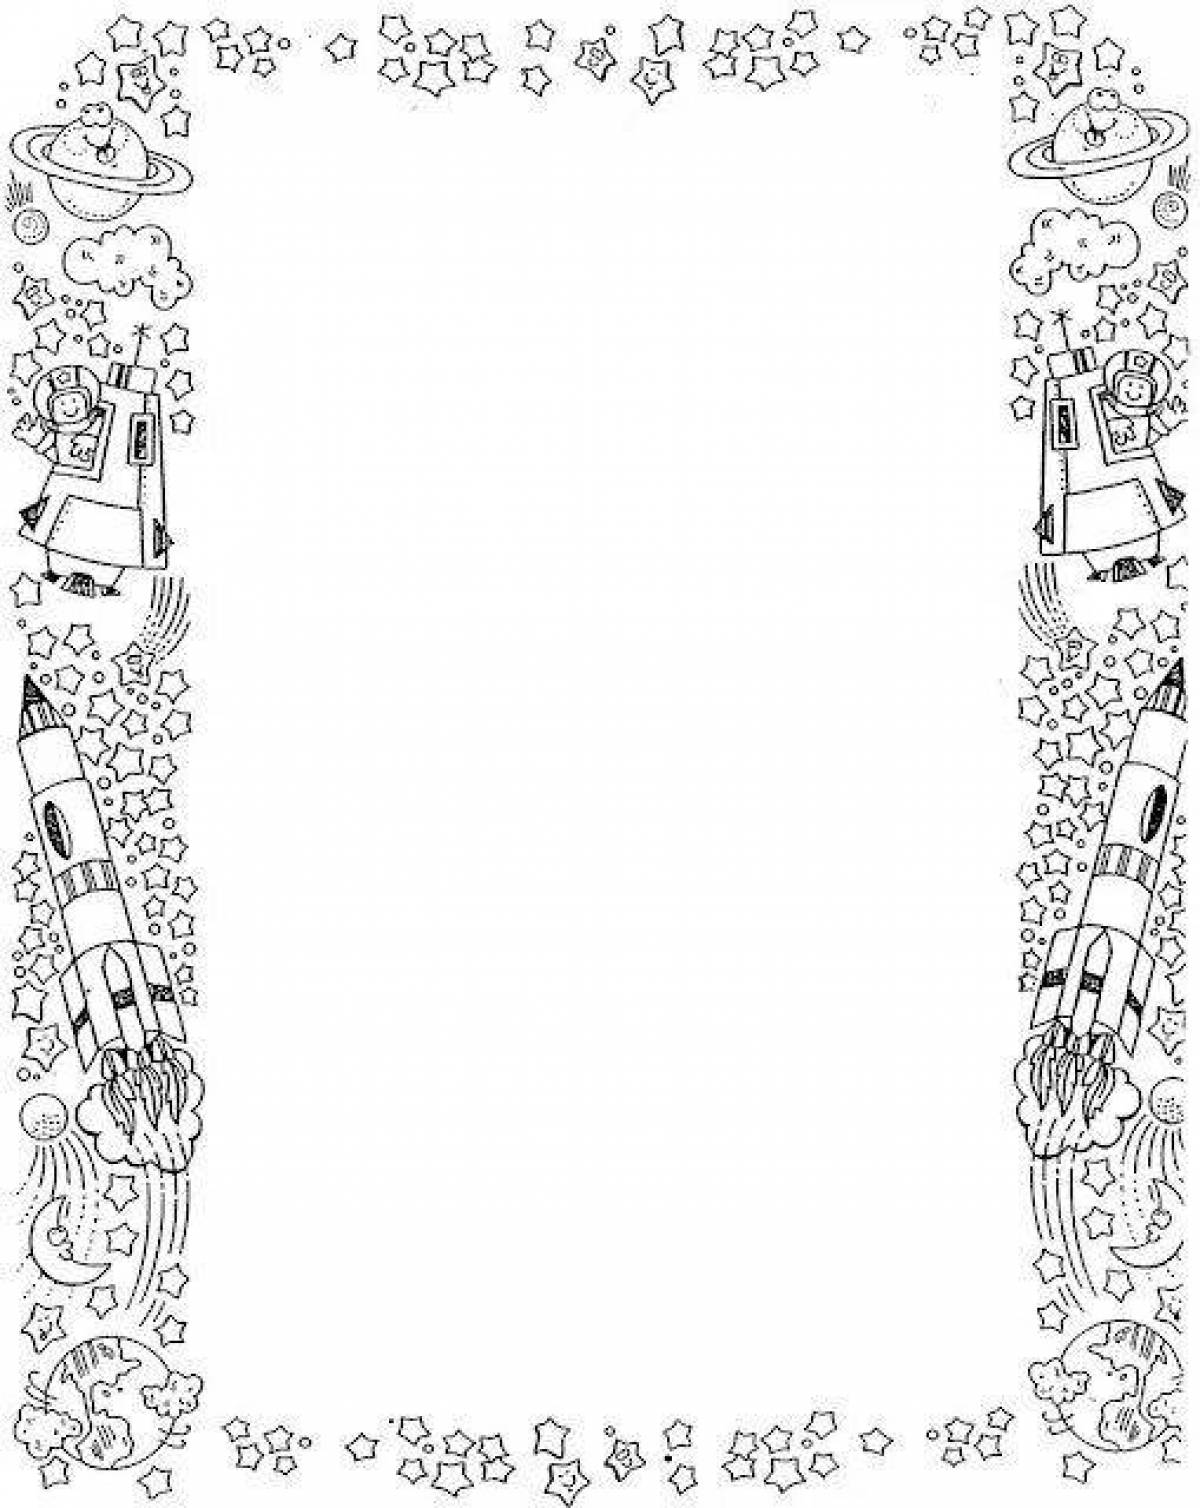 Delightful charter coloring page